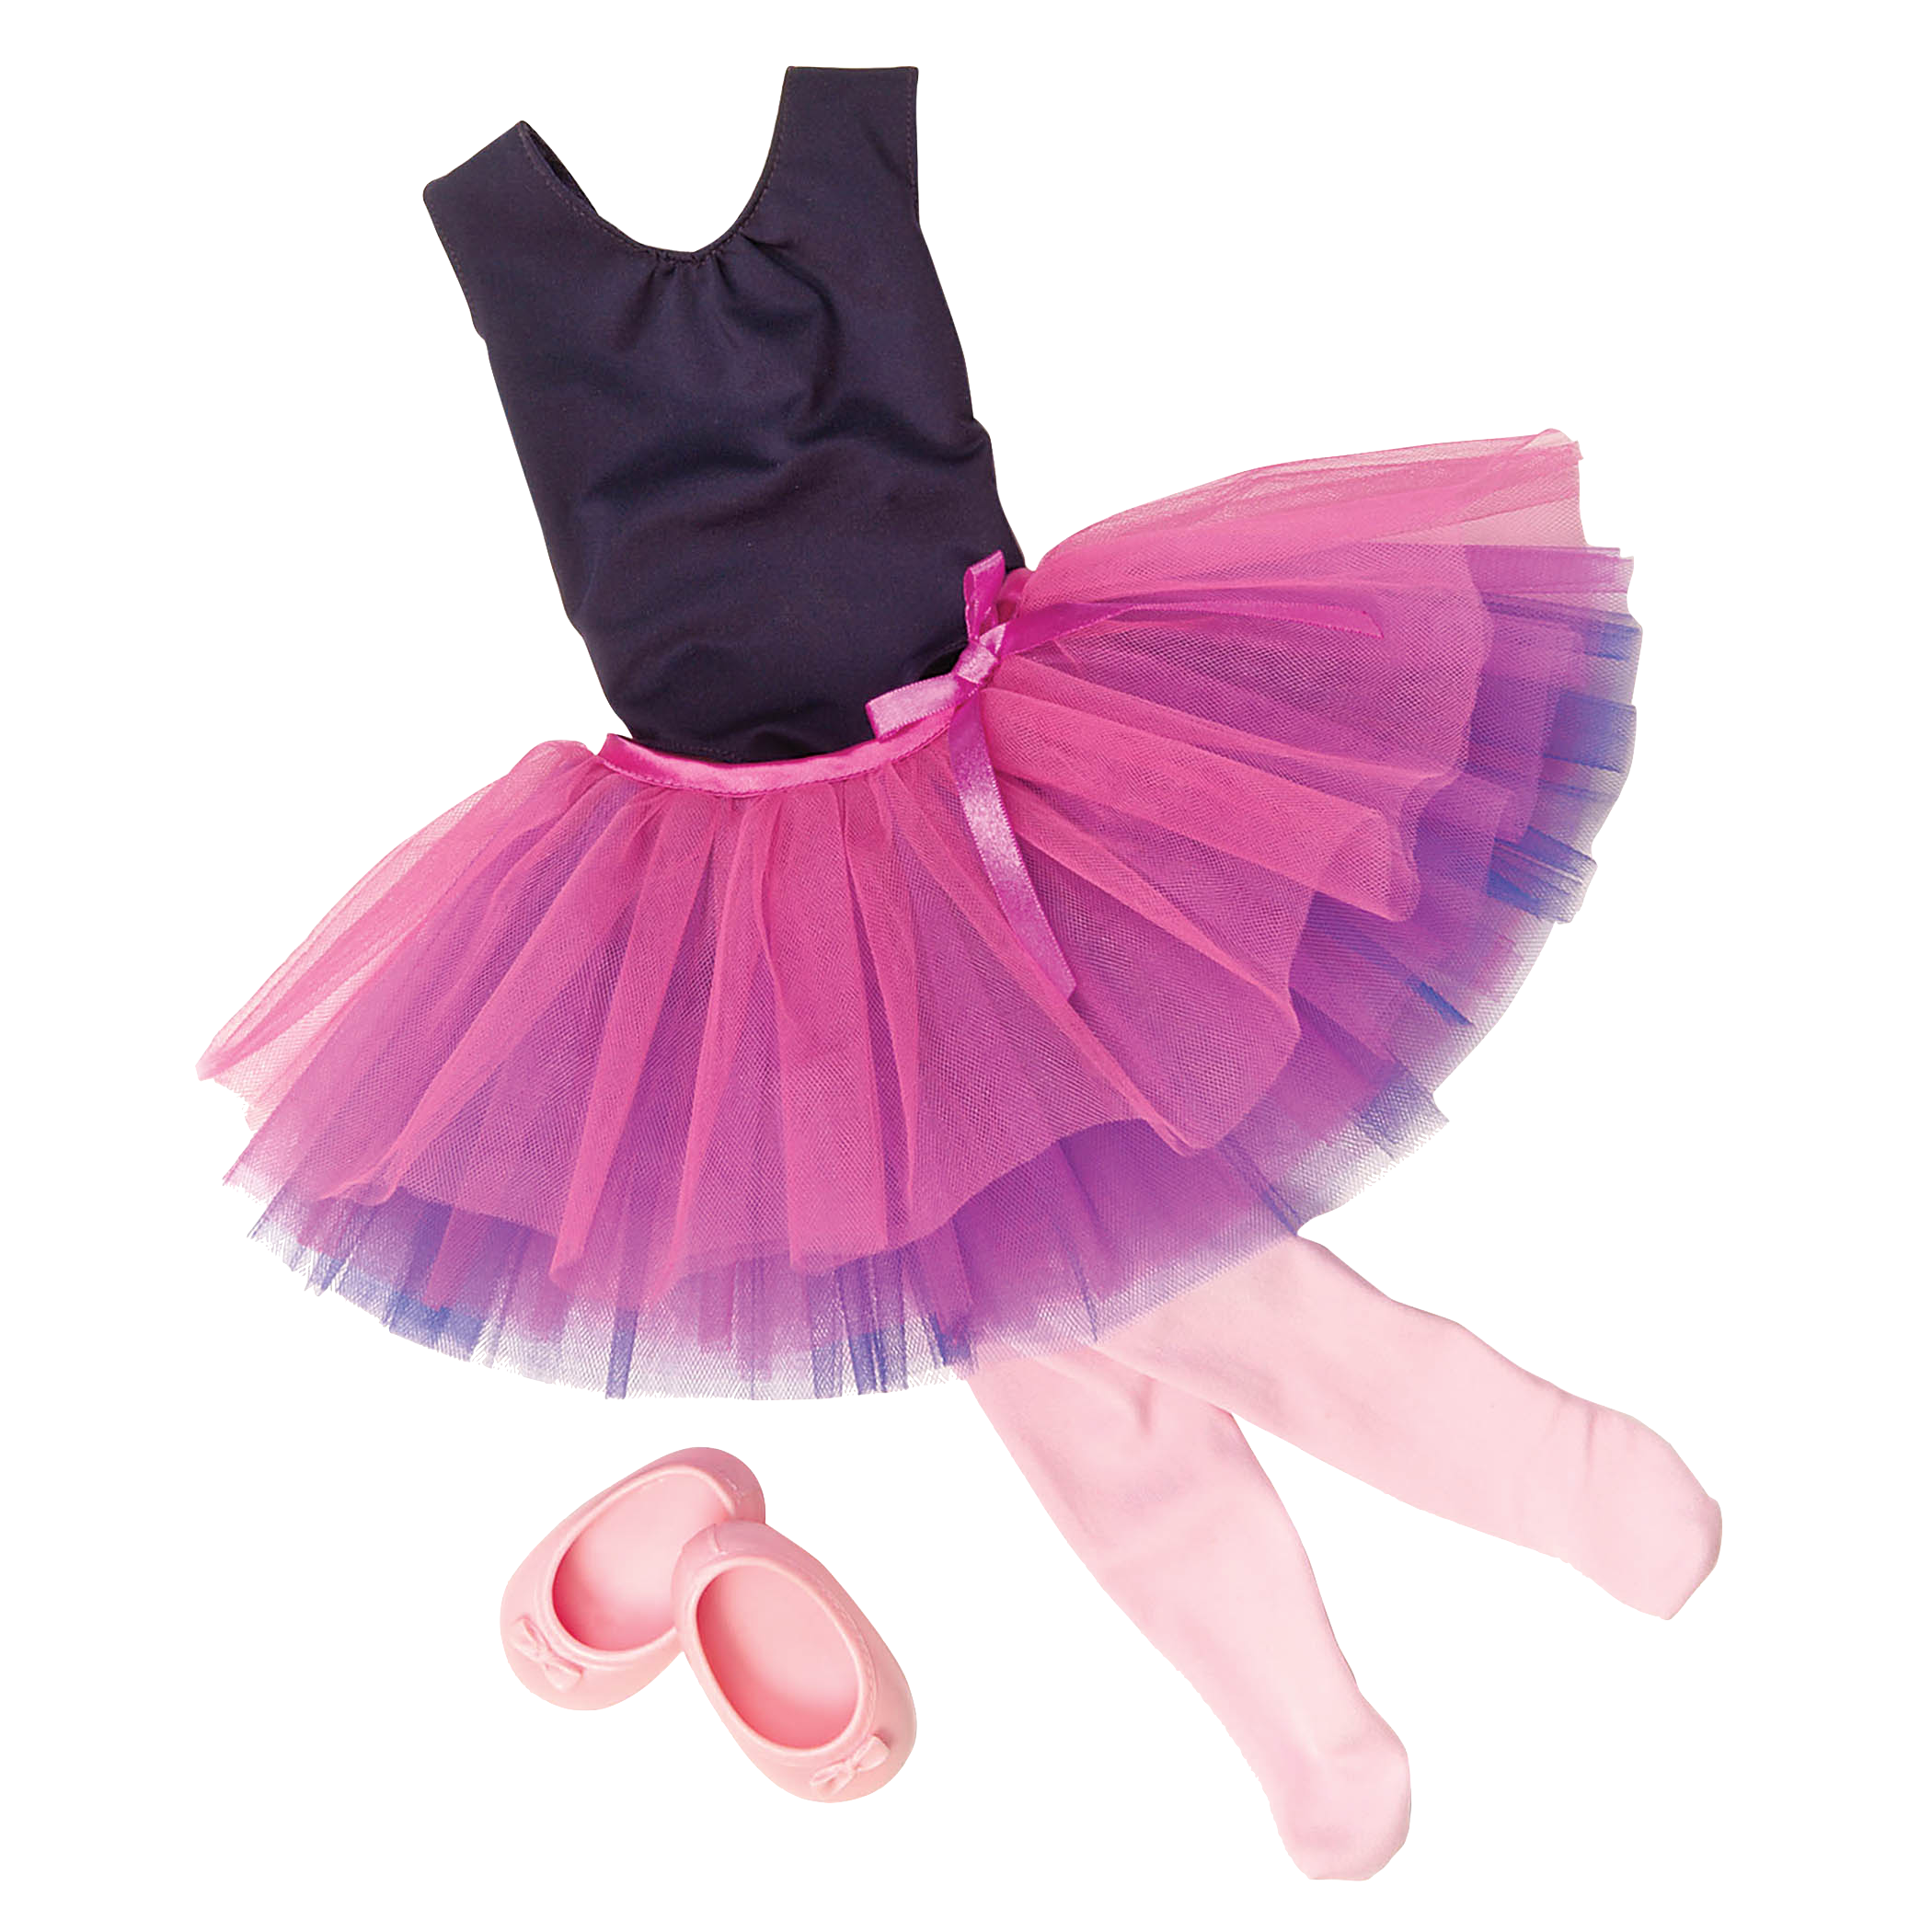 Dance Tulle You Drop ballet outfit all components